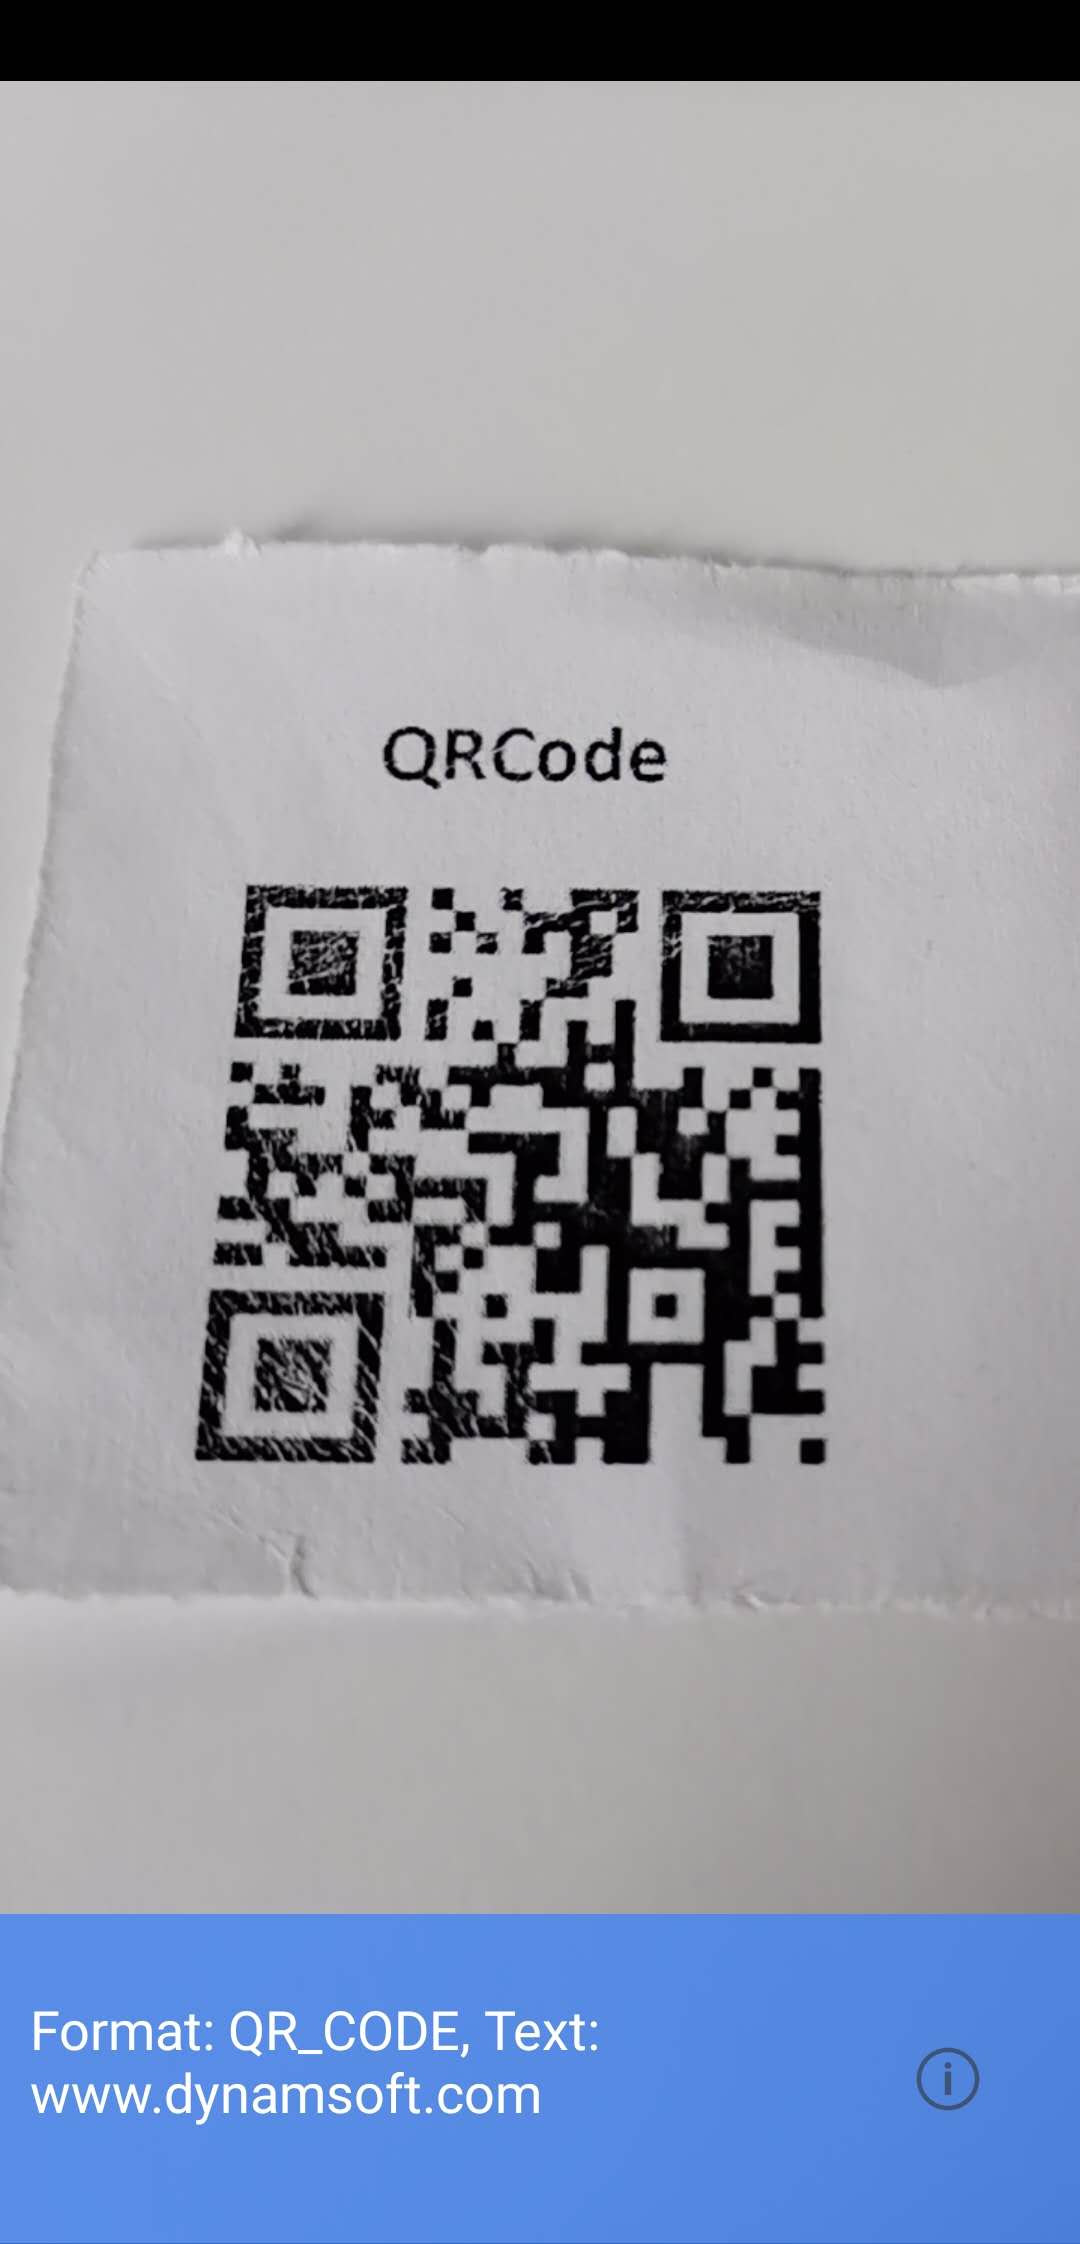 android ndk barcode